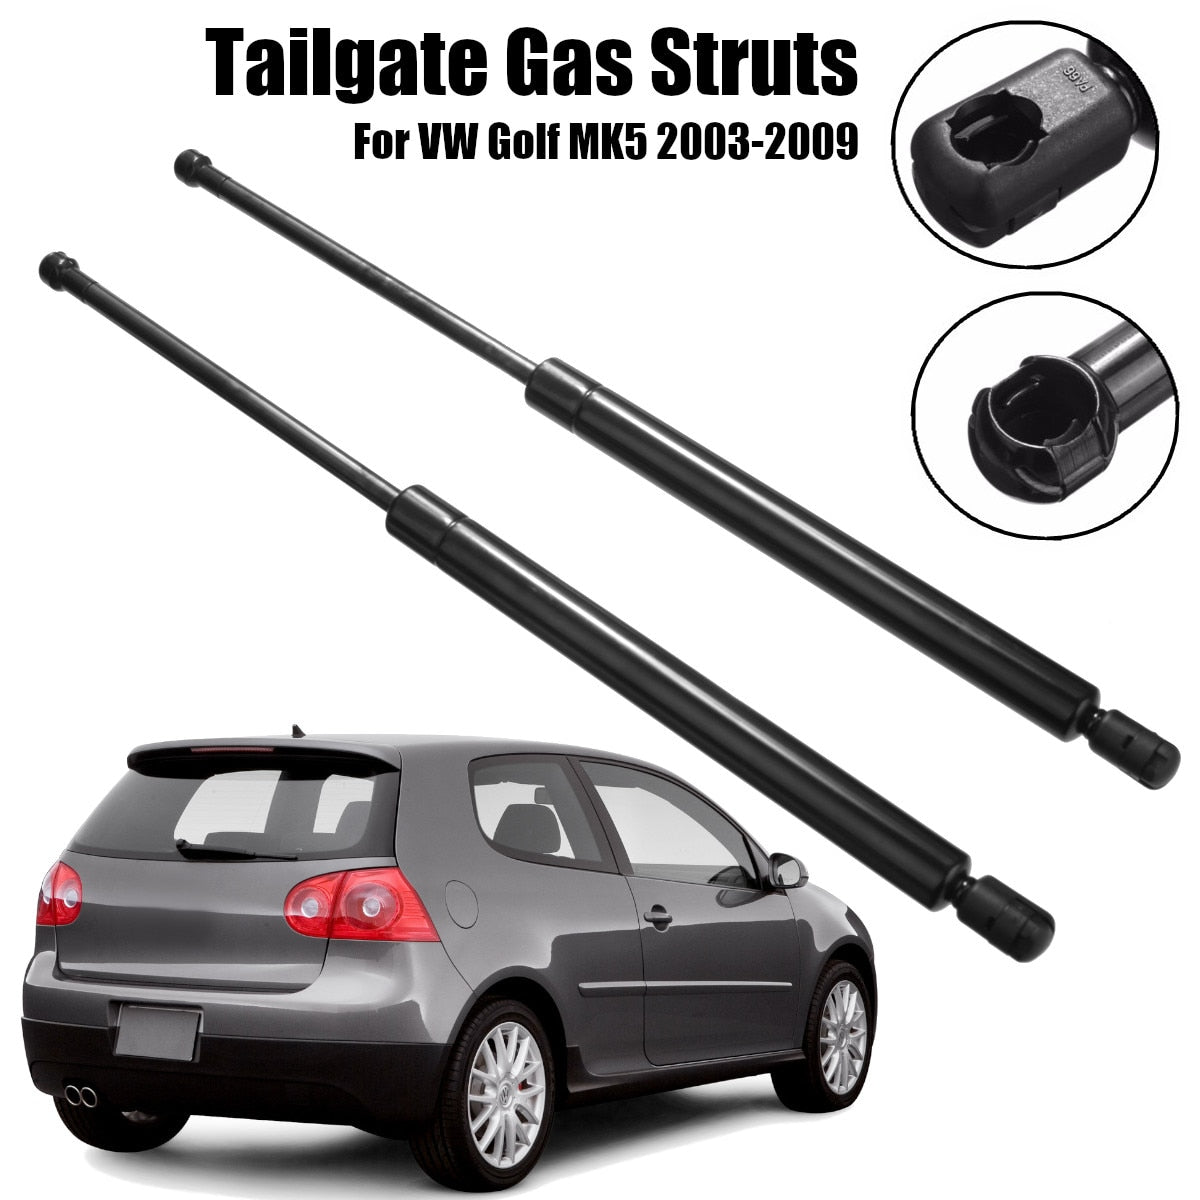 2pcs Car Rear Tail Gate Gas Struts Boot Holders Lifter Support For VW Golf MK5 2003-2009 2 x Rear Tailgate Gas Struts Boot Holders Support For VW Golf MK5 2003-2009 1K6827550 D 
Brand: MAGNETI MARELLI. Made in EU.
2PCS Rear Tail Gate Gas Struts Boot Holders Lifter Support Suit For VW Golf 5 MK5 GTI GTX TSI FSI GT Sport 2003-2009
Rear Tailgate Hatchback 

Brand New Aftermarket product.

OE Part Numbers: 1K6827550D  1K6827550E  1K6827550F 1K6827550C 1K6 827 550 D  1K